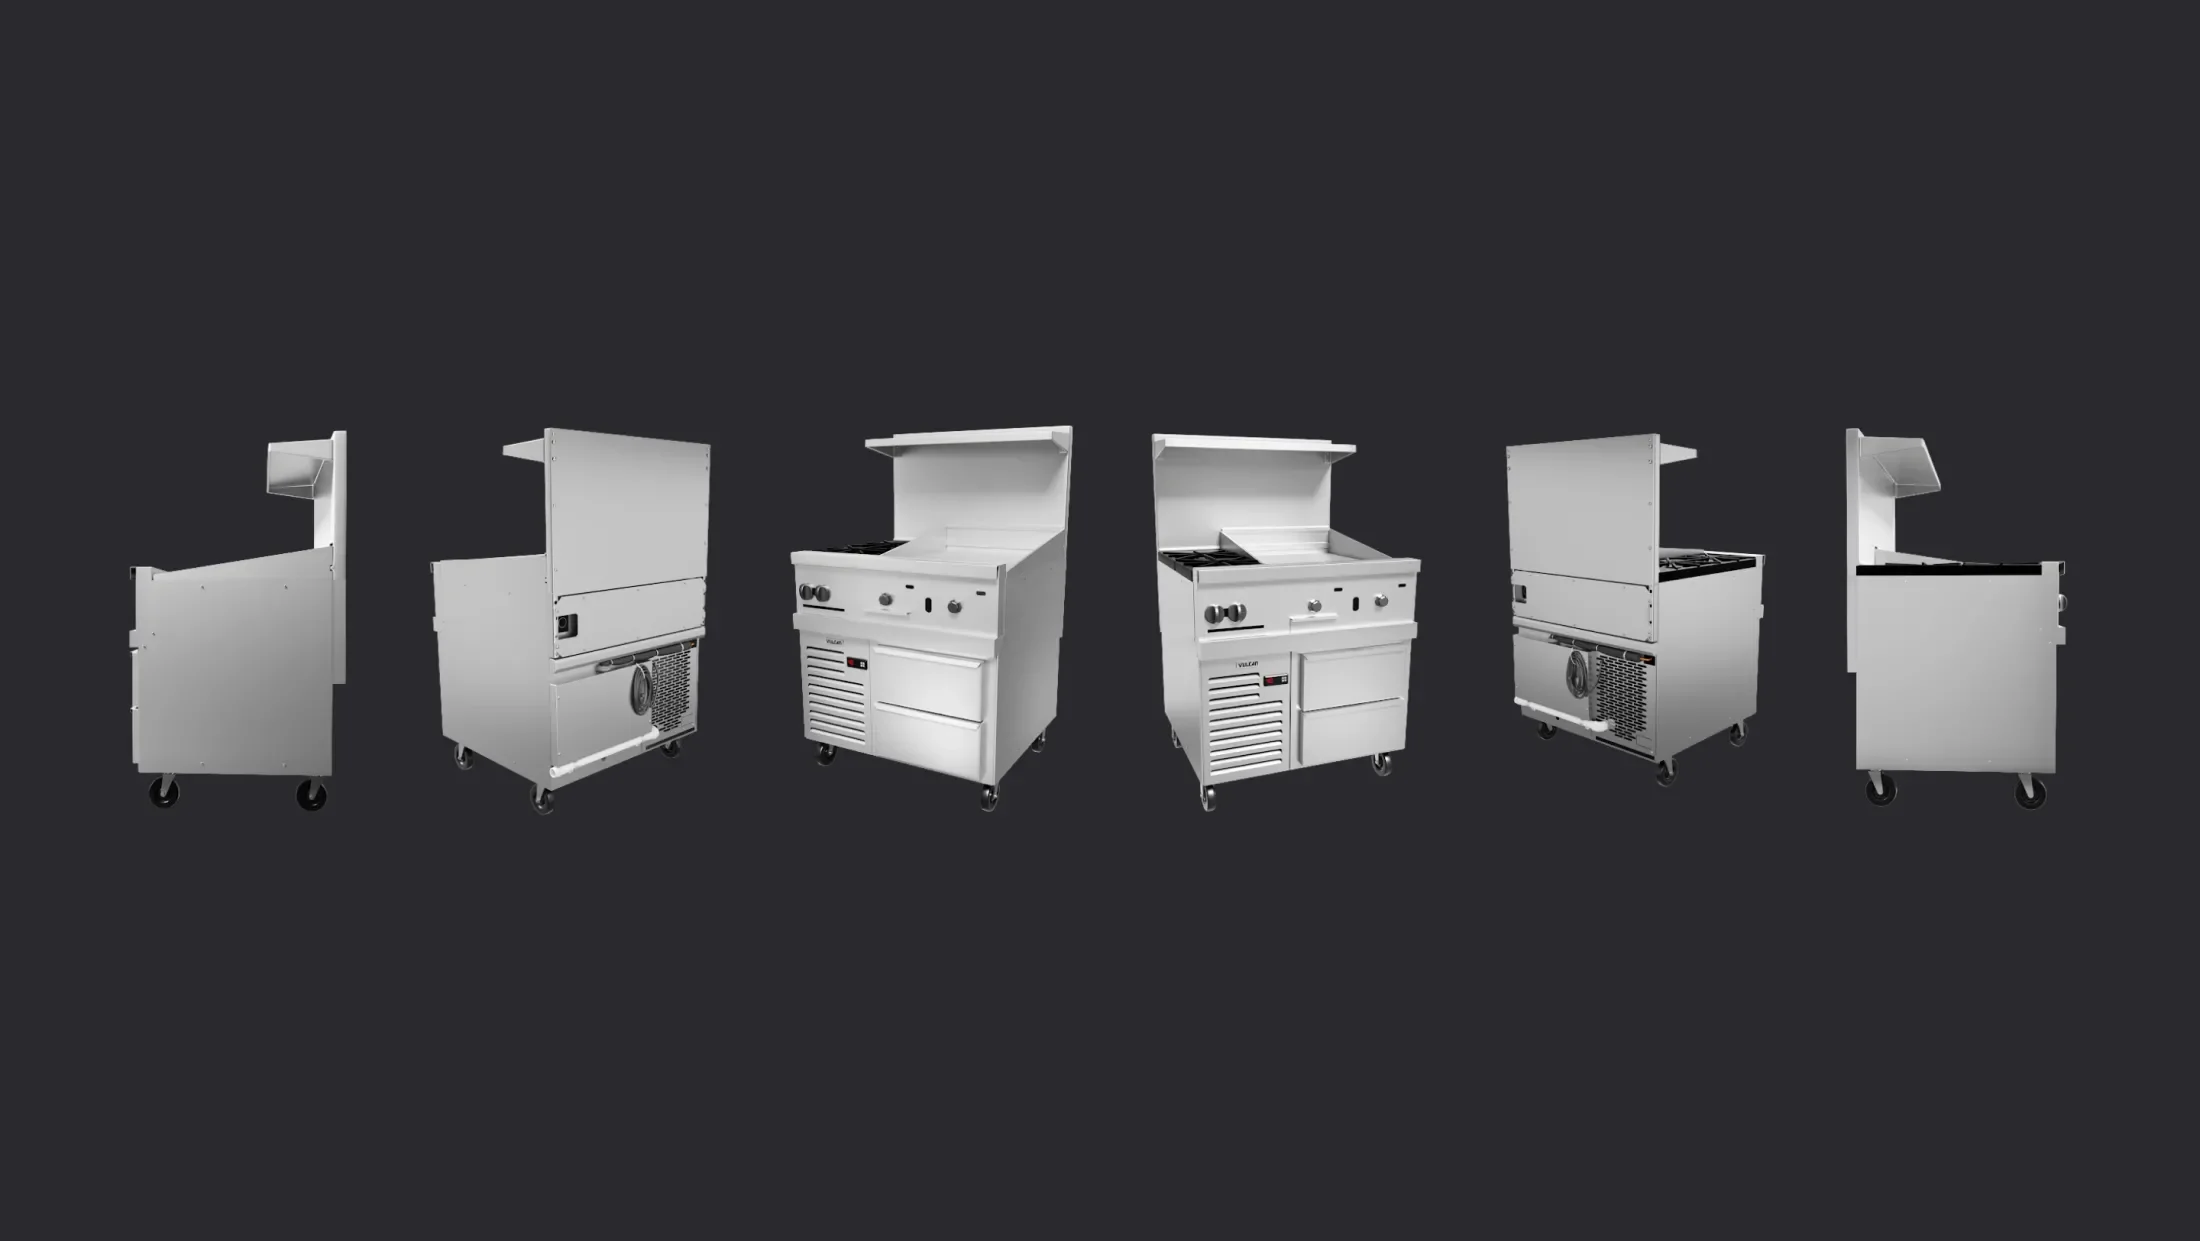 3D render of a Vulcan oven from six angles